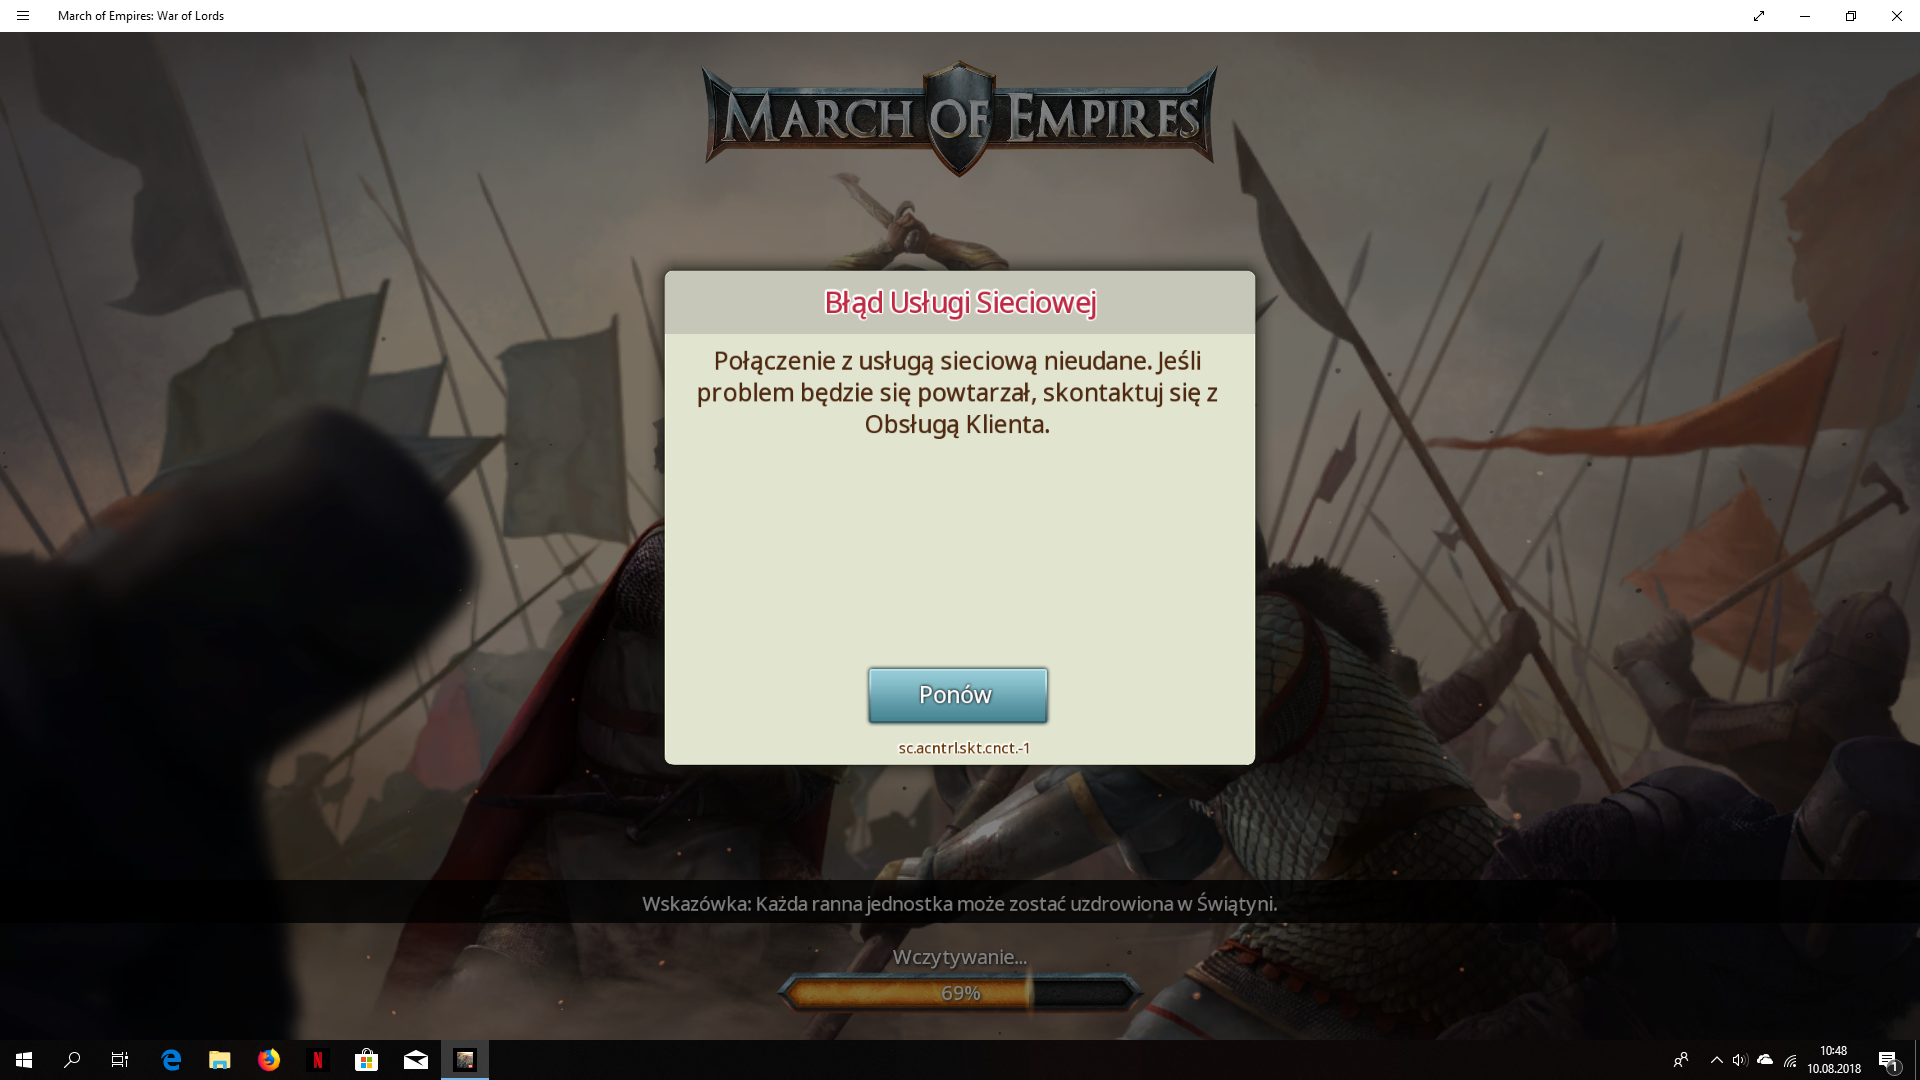 march of empires war of lords windows 10 old computer